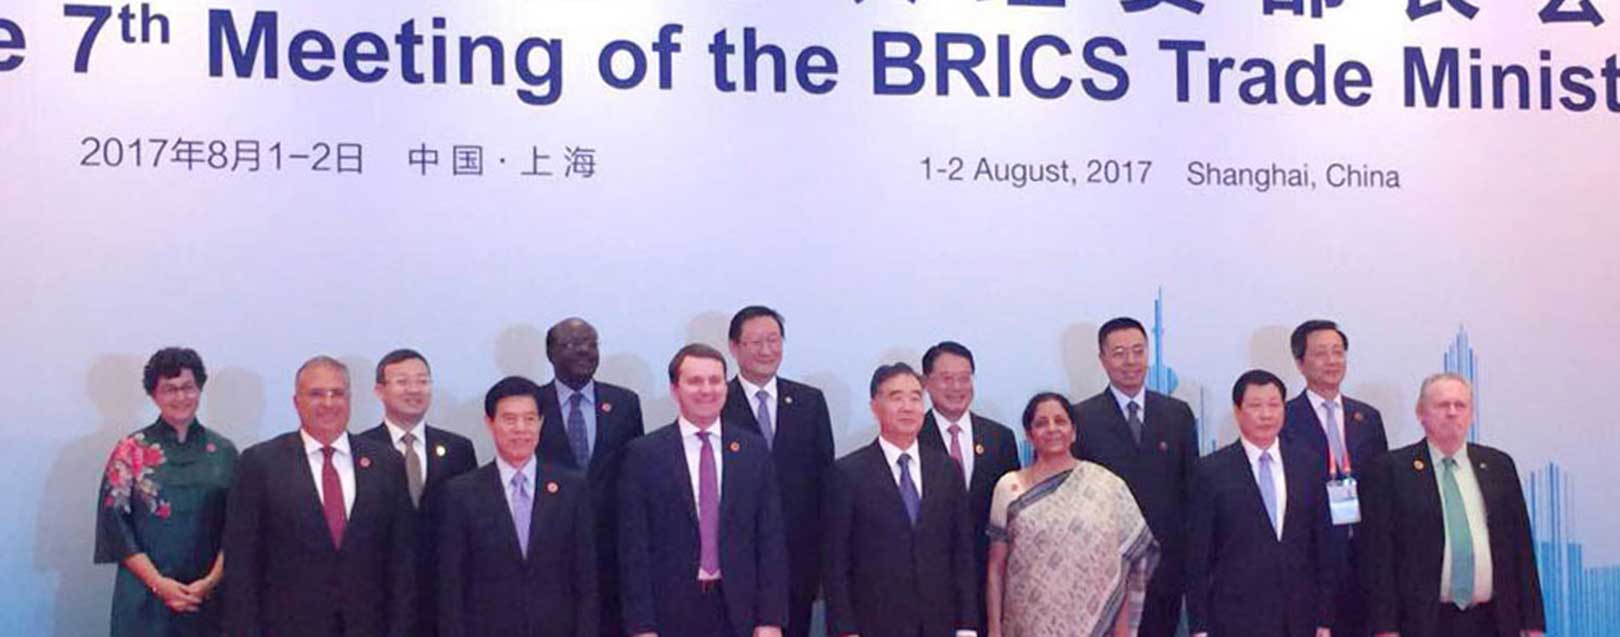 India, BRICS to set up Agriculture Research Platform